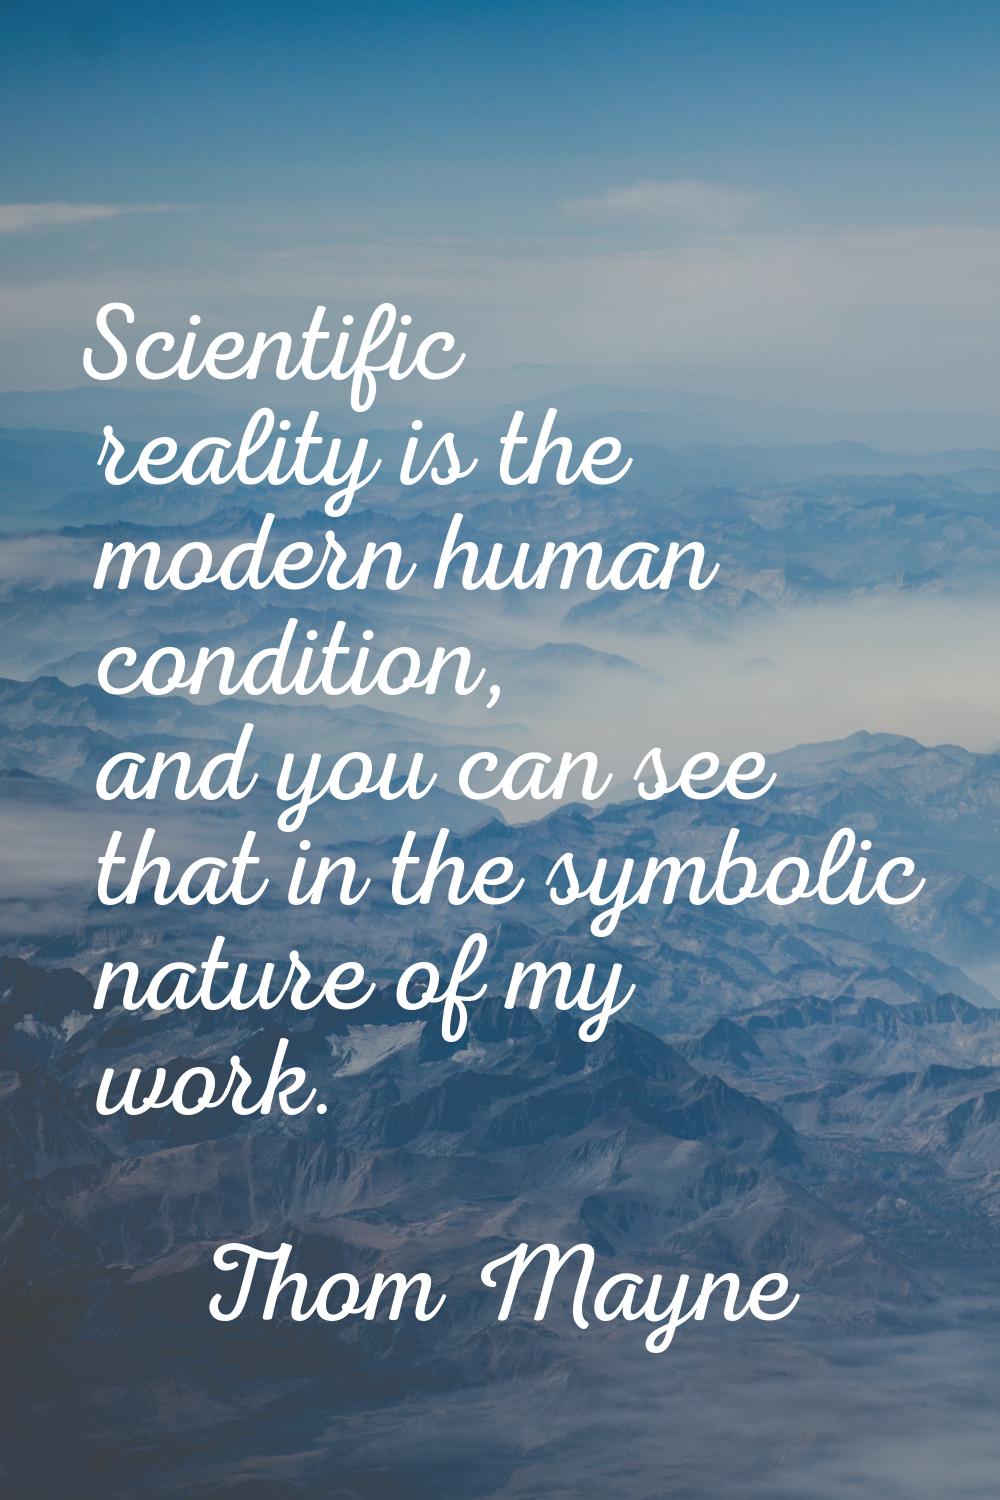 Scientific reality is the modern human condition, and you can see that in the symbolic nature of my